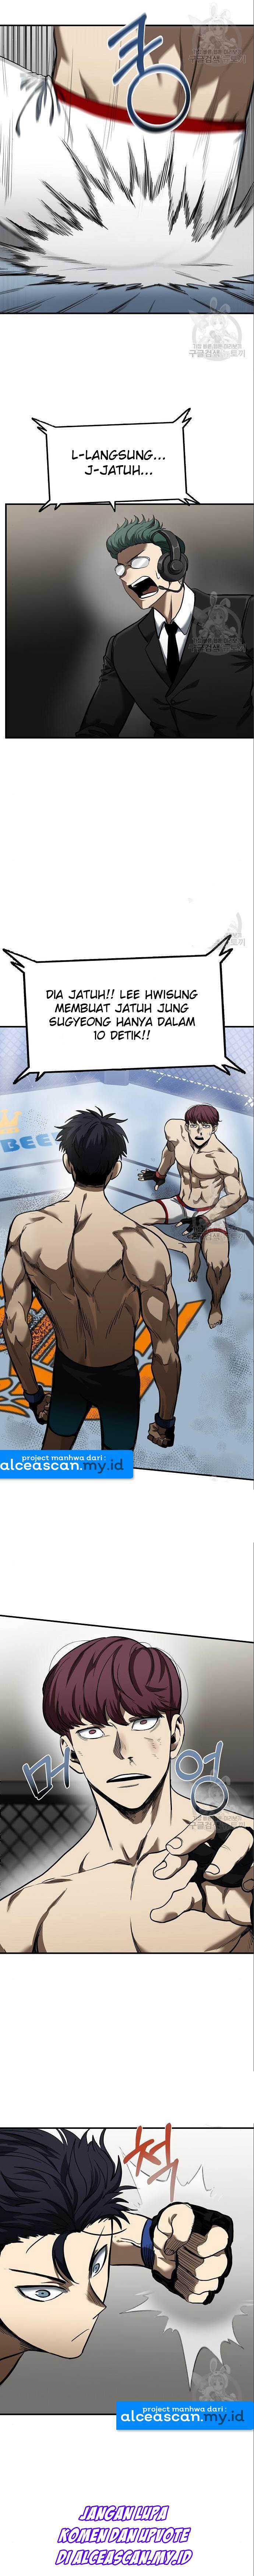 King MMA Chapter 16